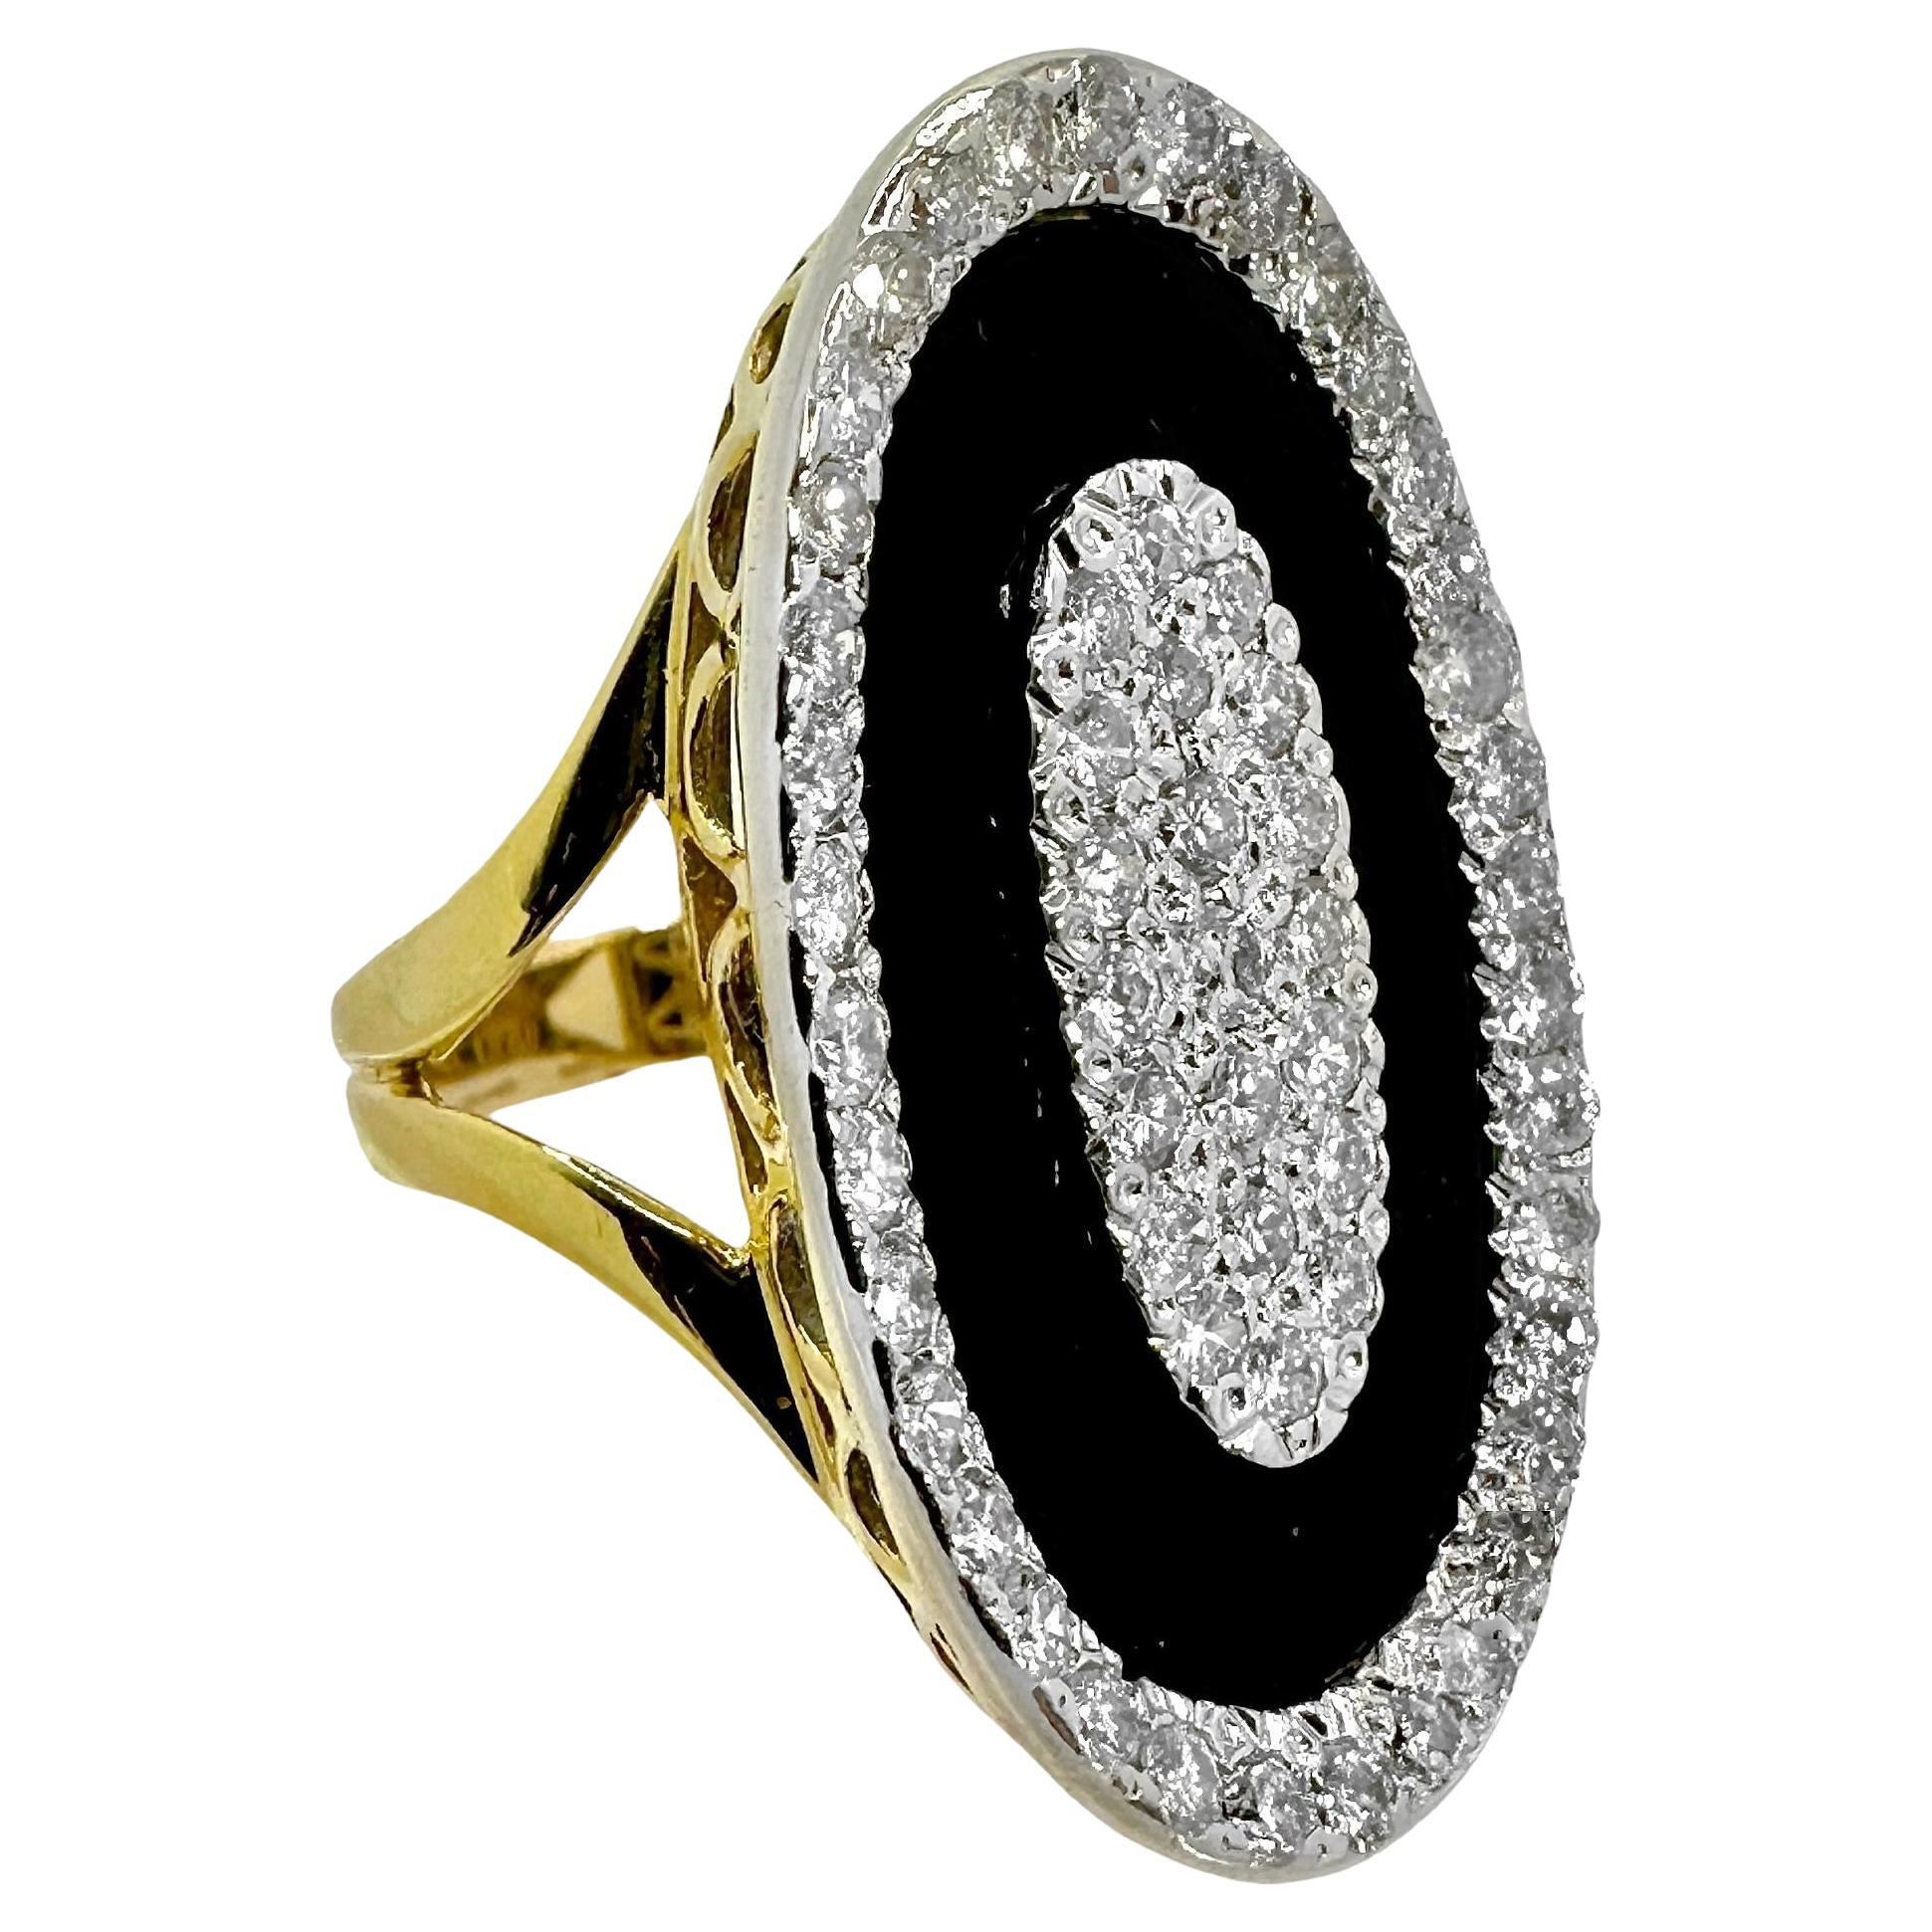 Onyx, Diamond and 18K Gold, Oval Shaped Ring, 1.25 Inches Long by .75 Inch Wide